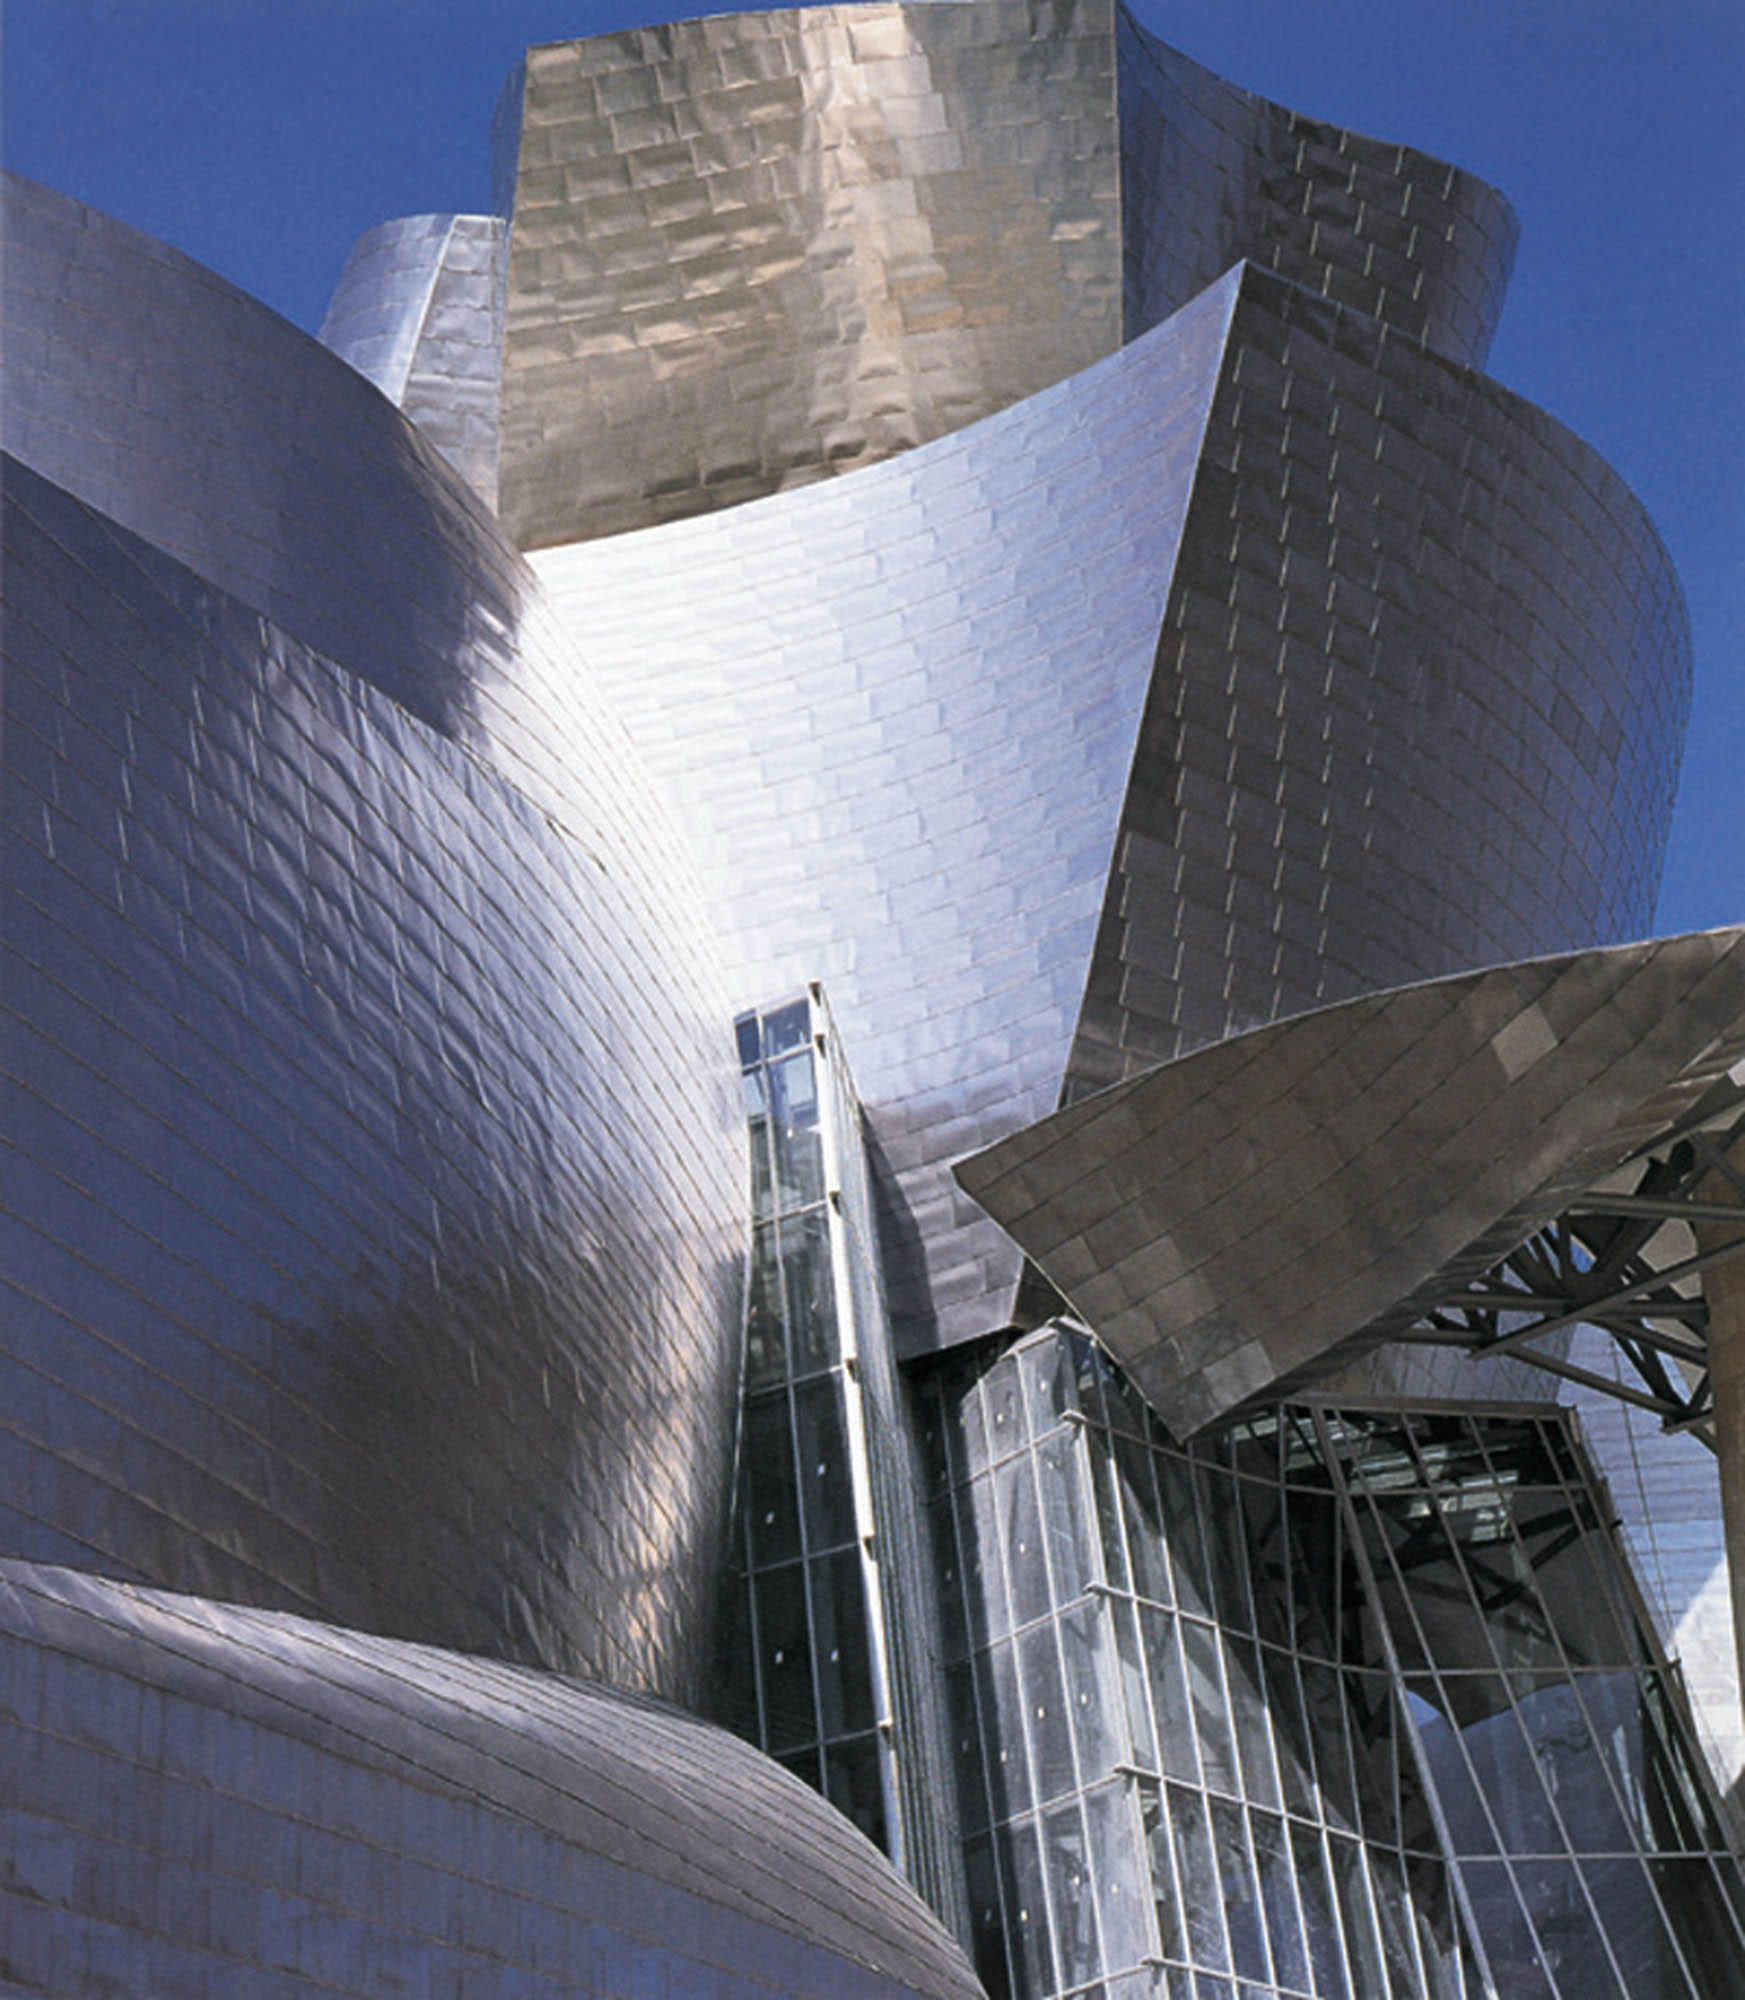 Frank Gehry's design, sheathed in titanium.